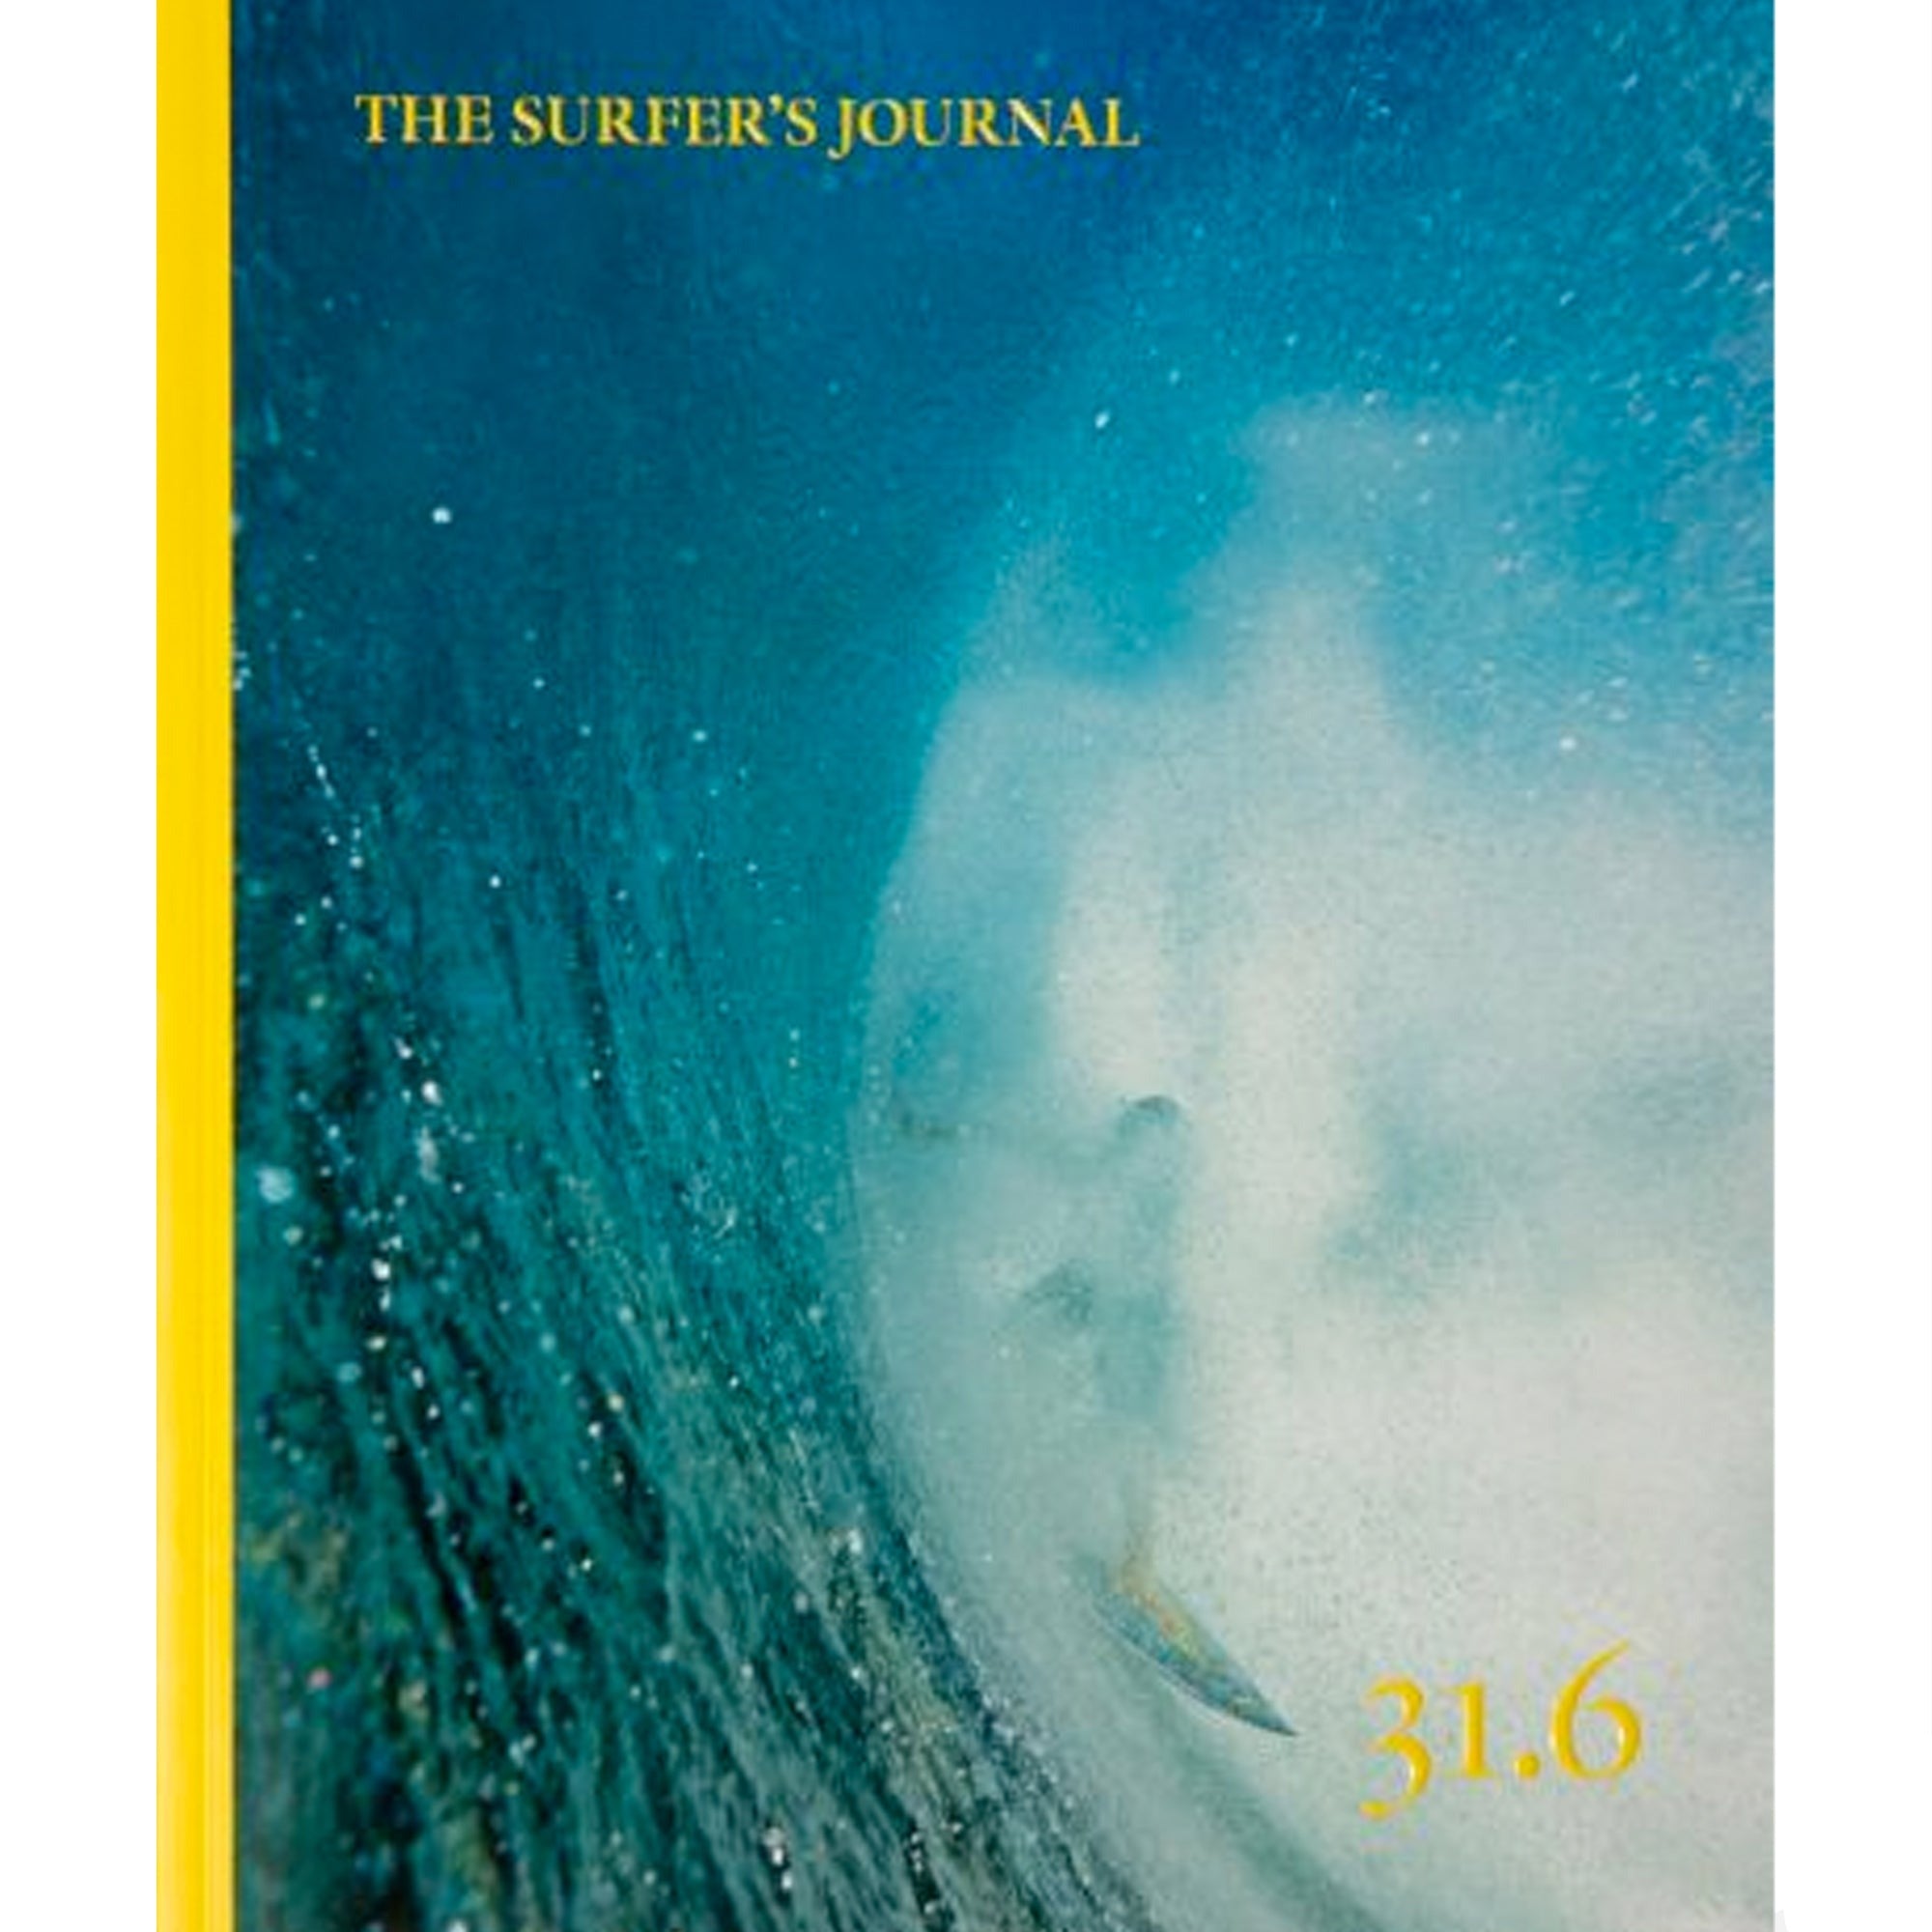 The Surfer Journal #31.6